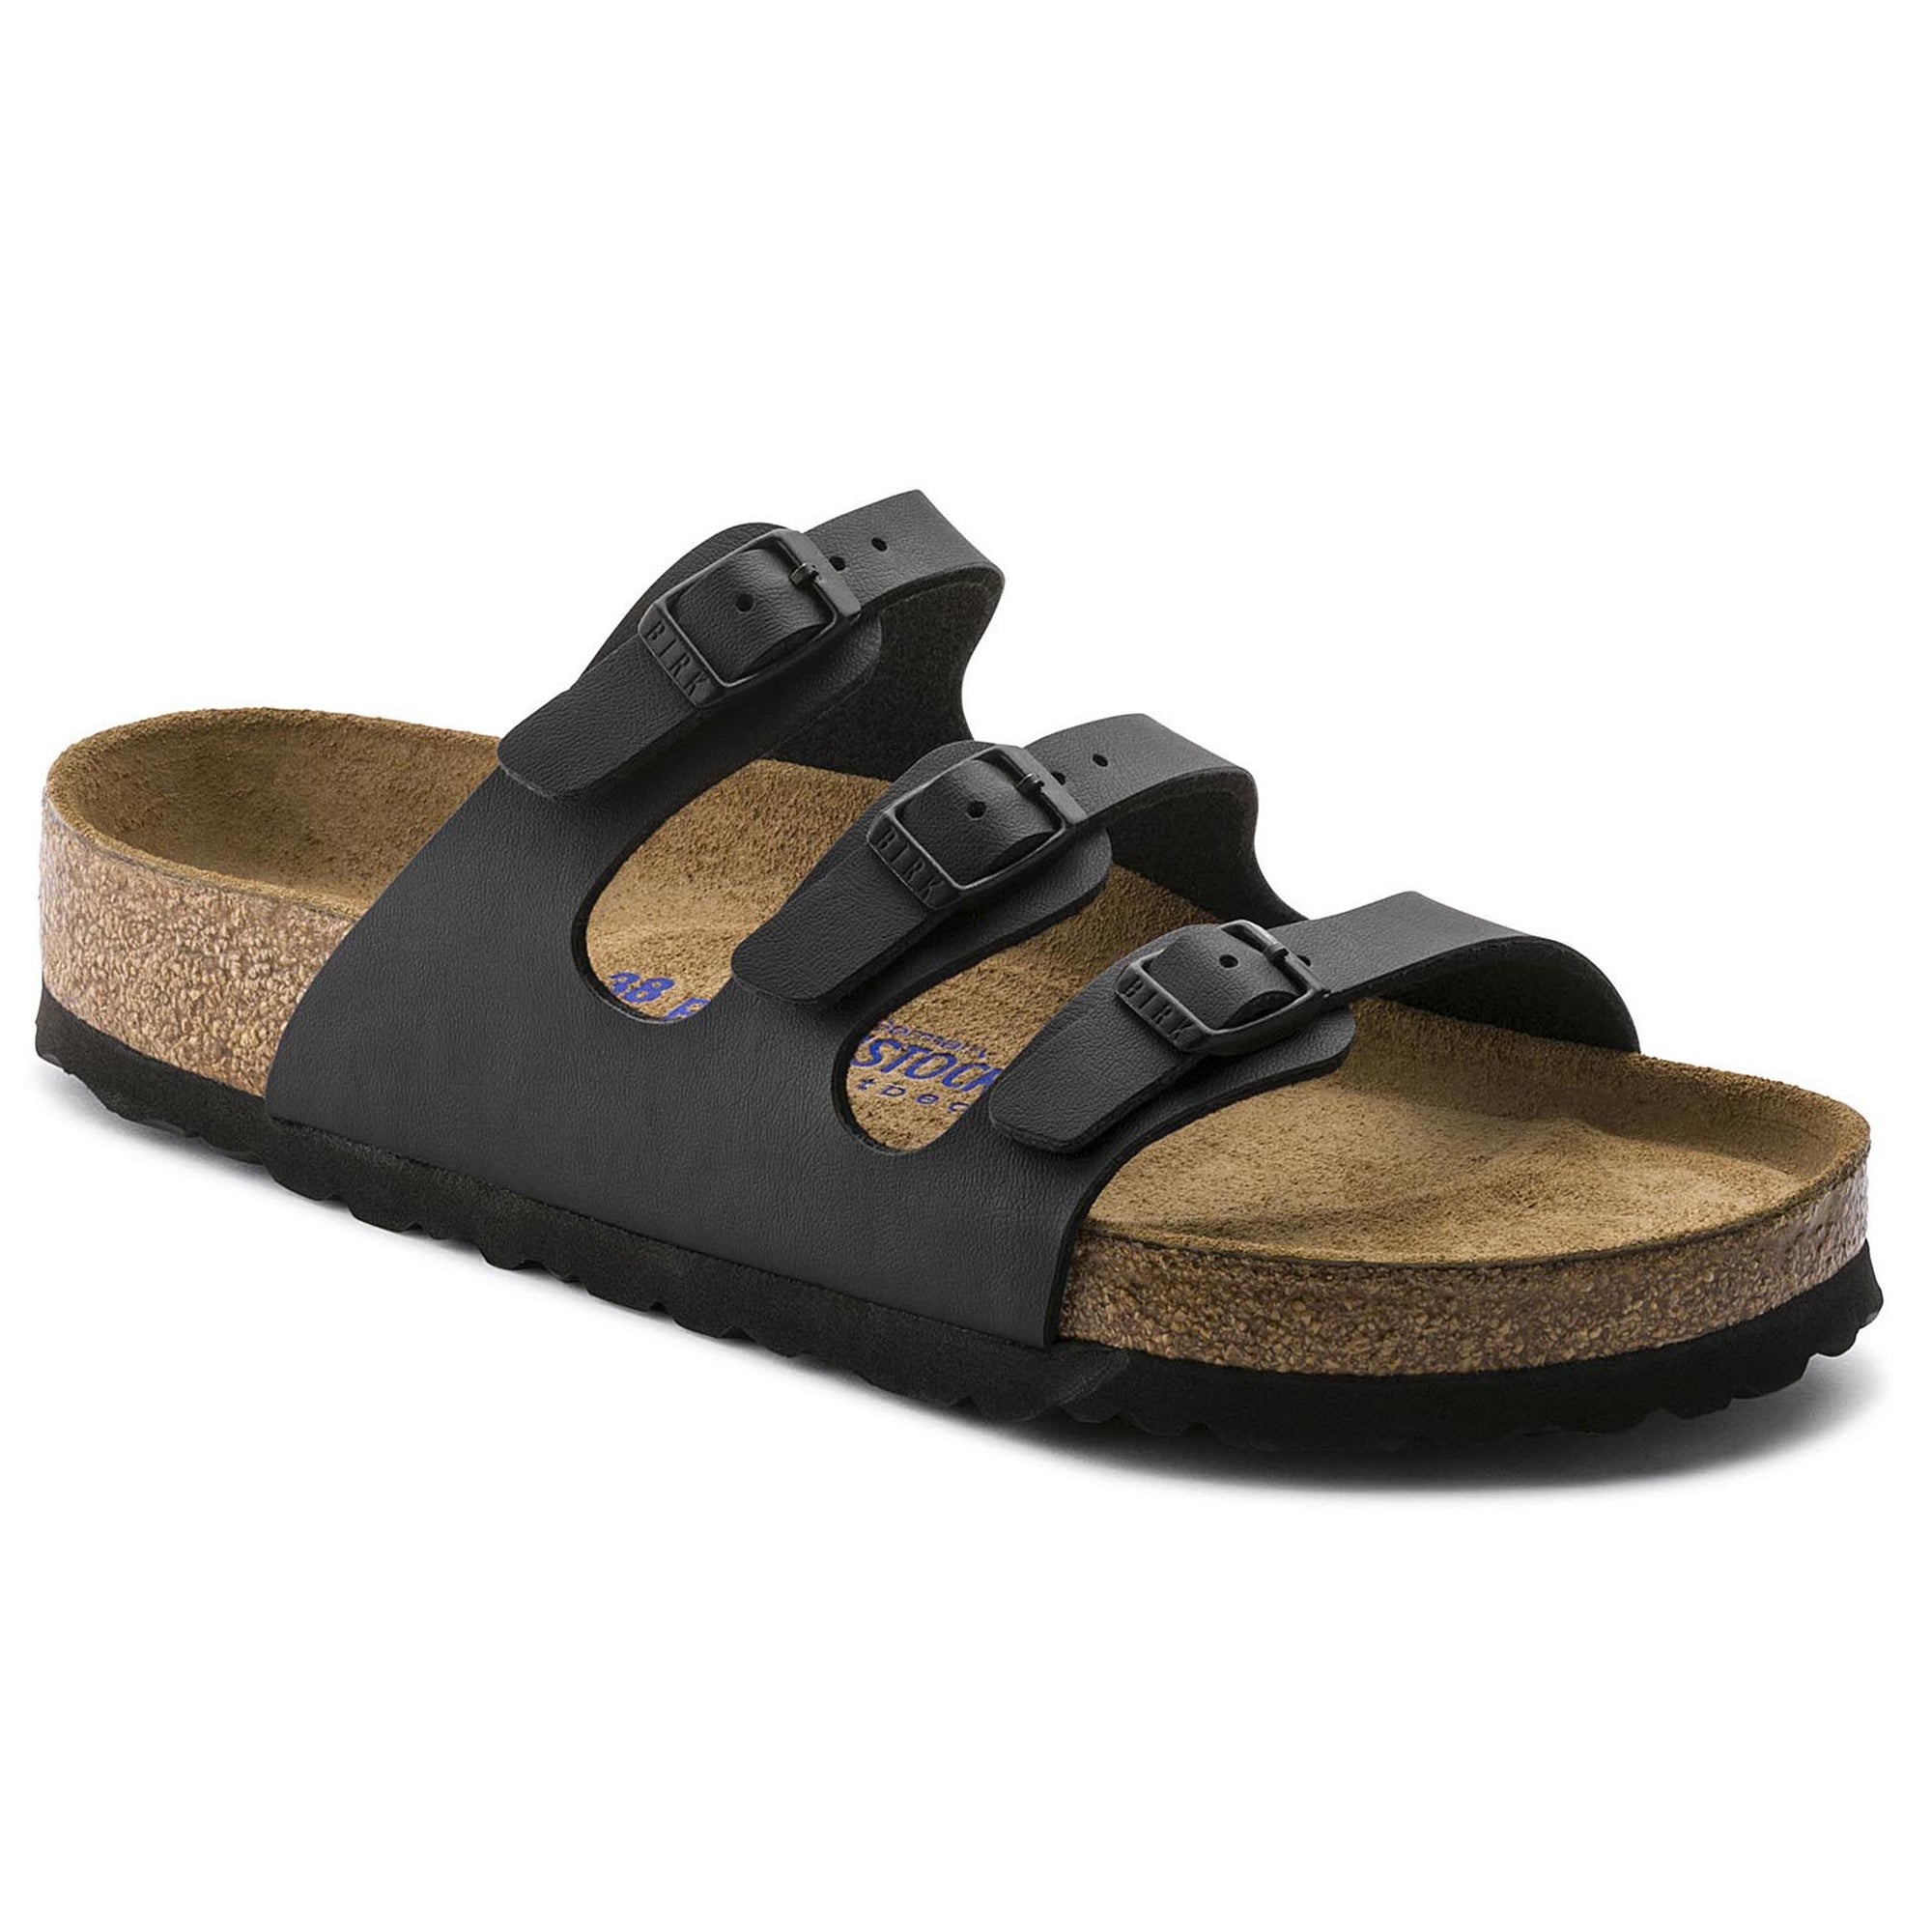 Florida Soft Footbed : Black Synthetic